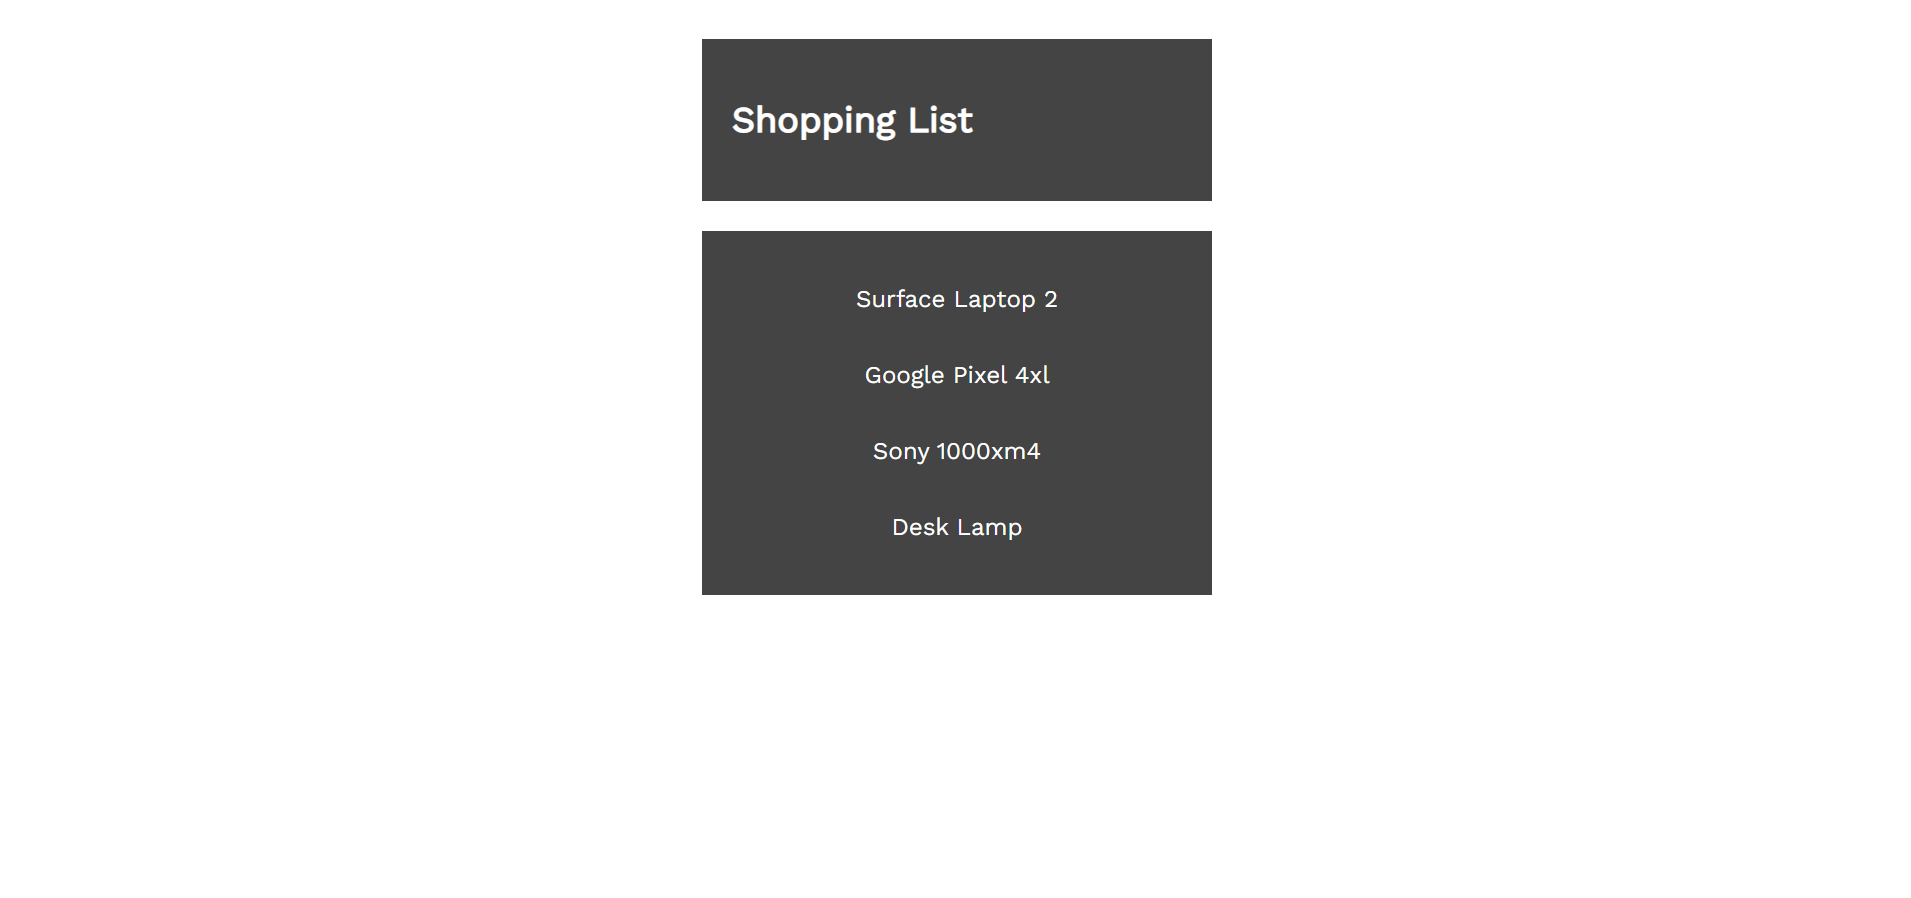 shopping list is the code output from the real-world code example